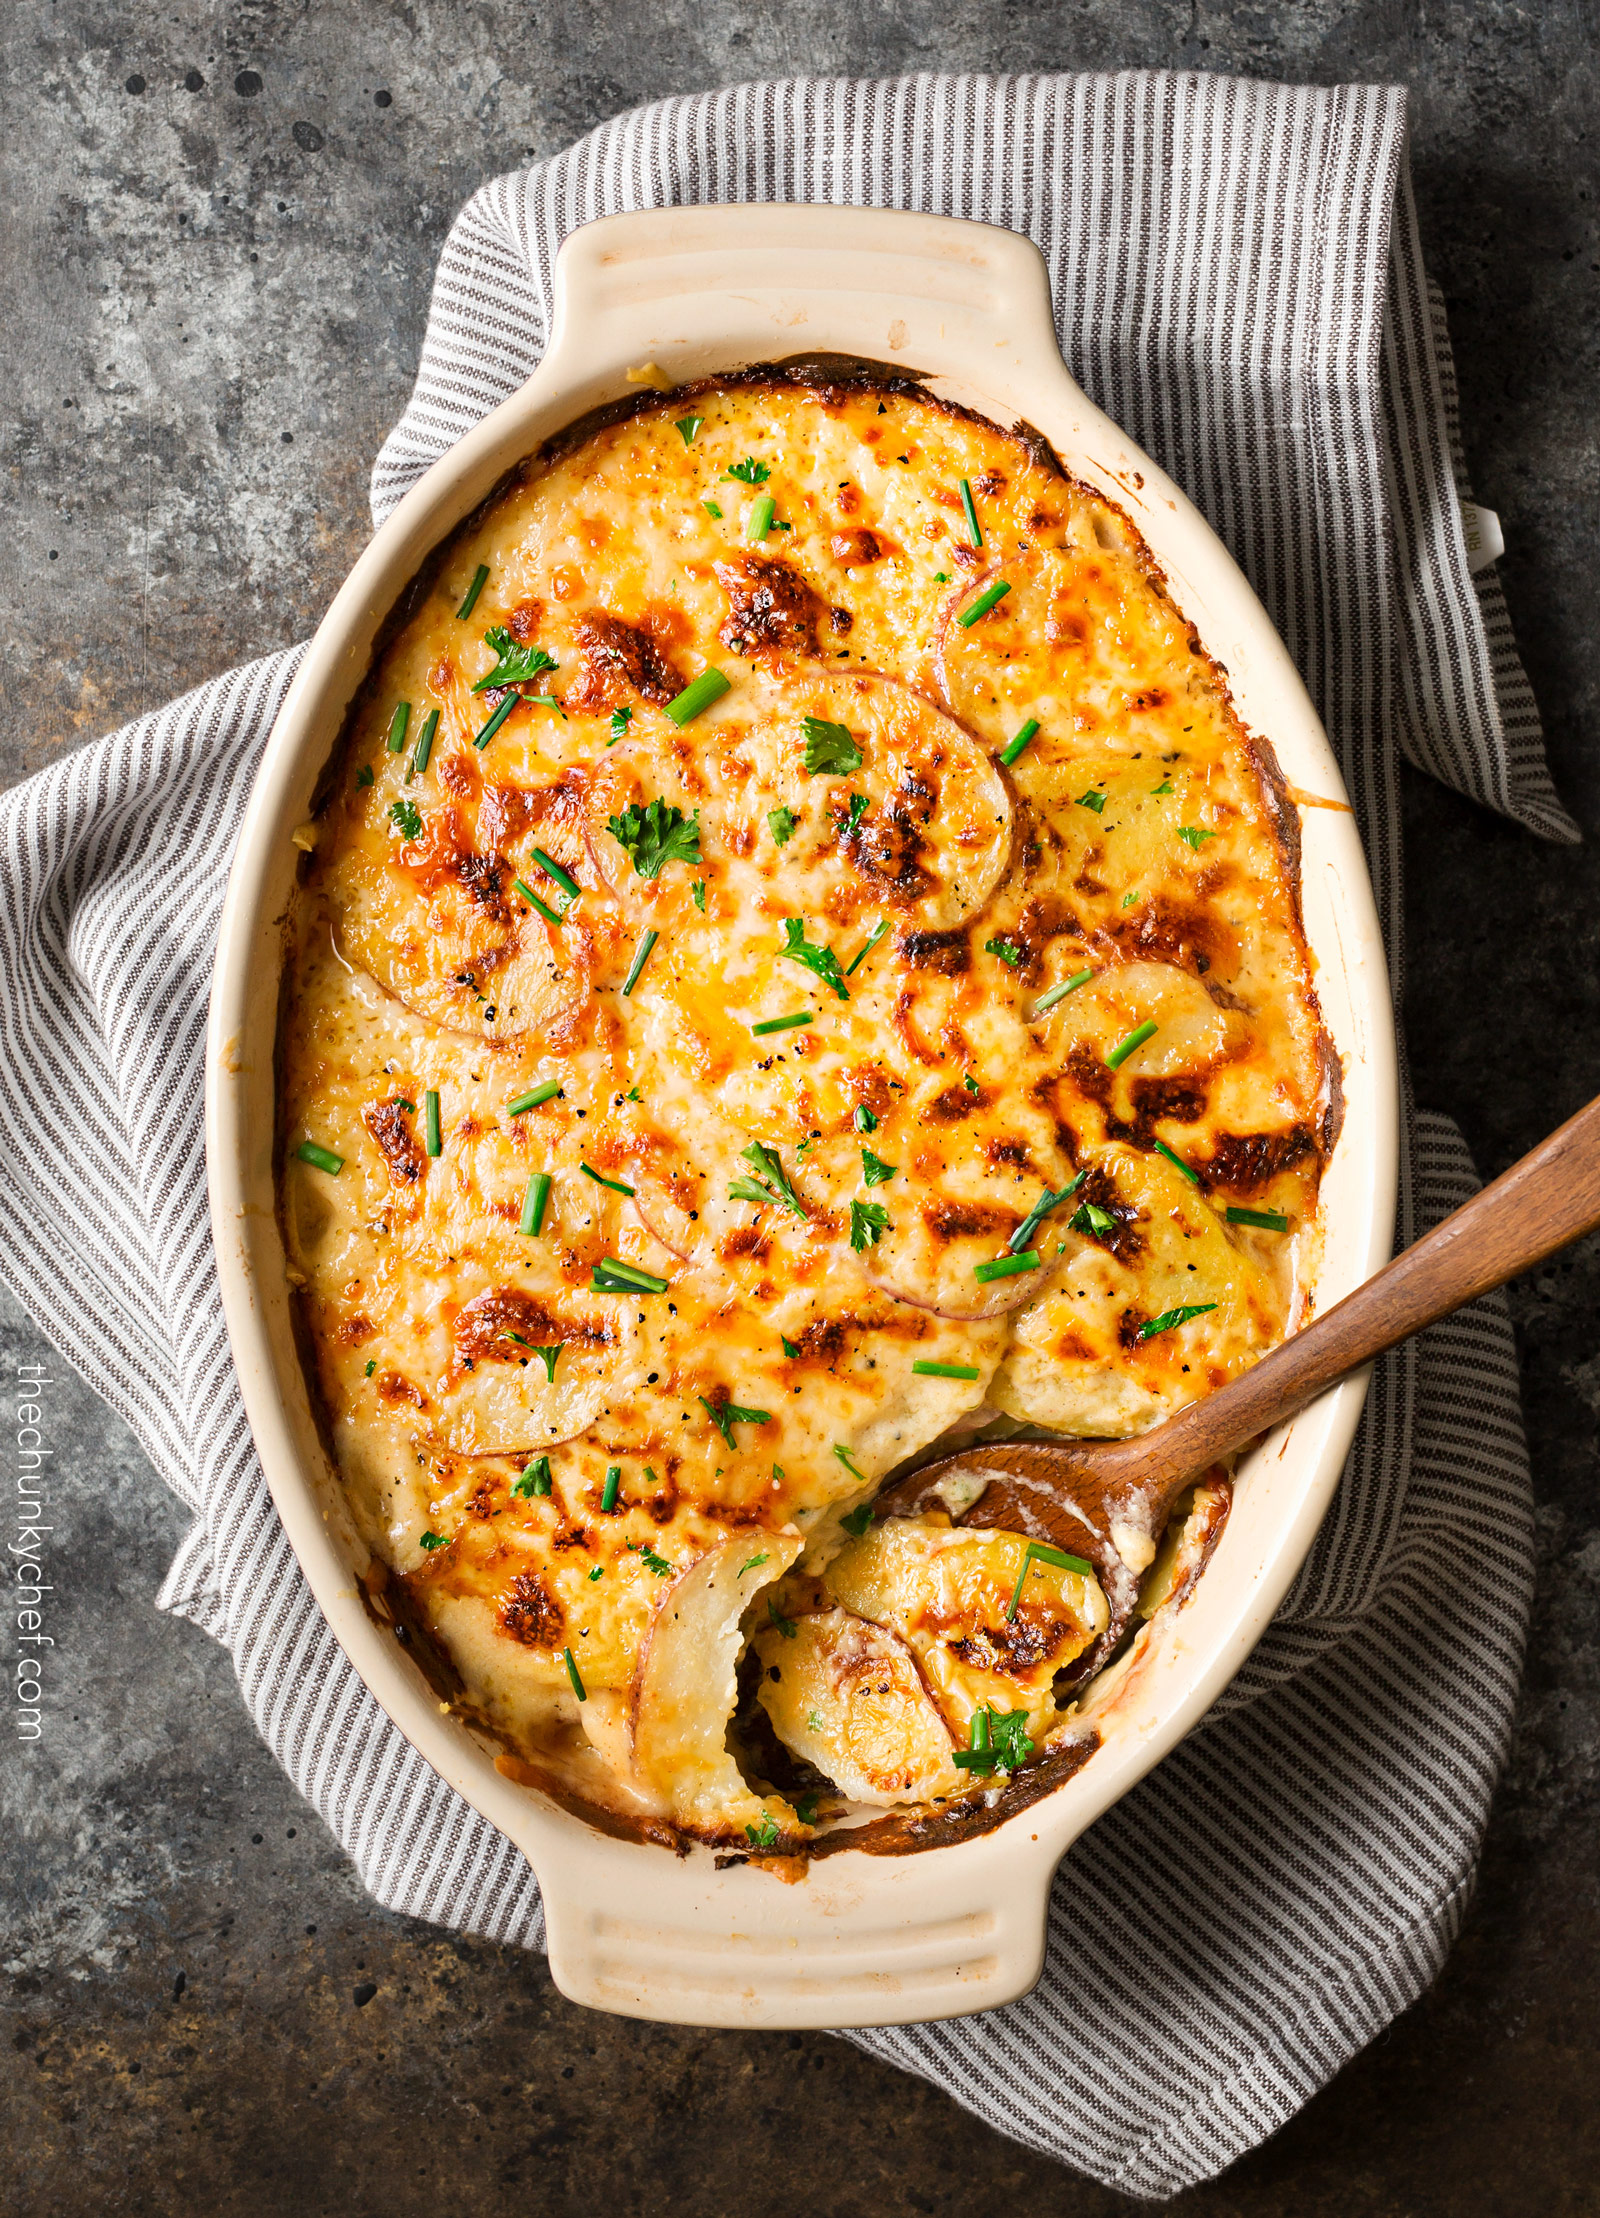 http://www.thechunkychef.com/wp-content/uploads/2017/03/Cheesy-Scalloped-Potatoes-4.jpg